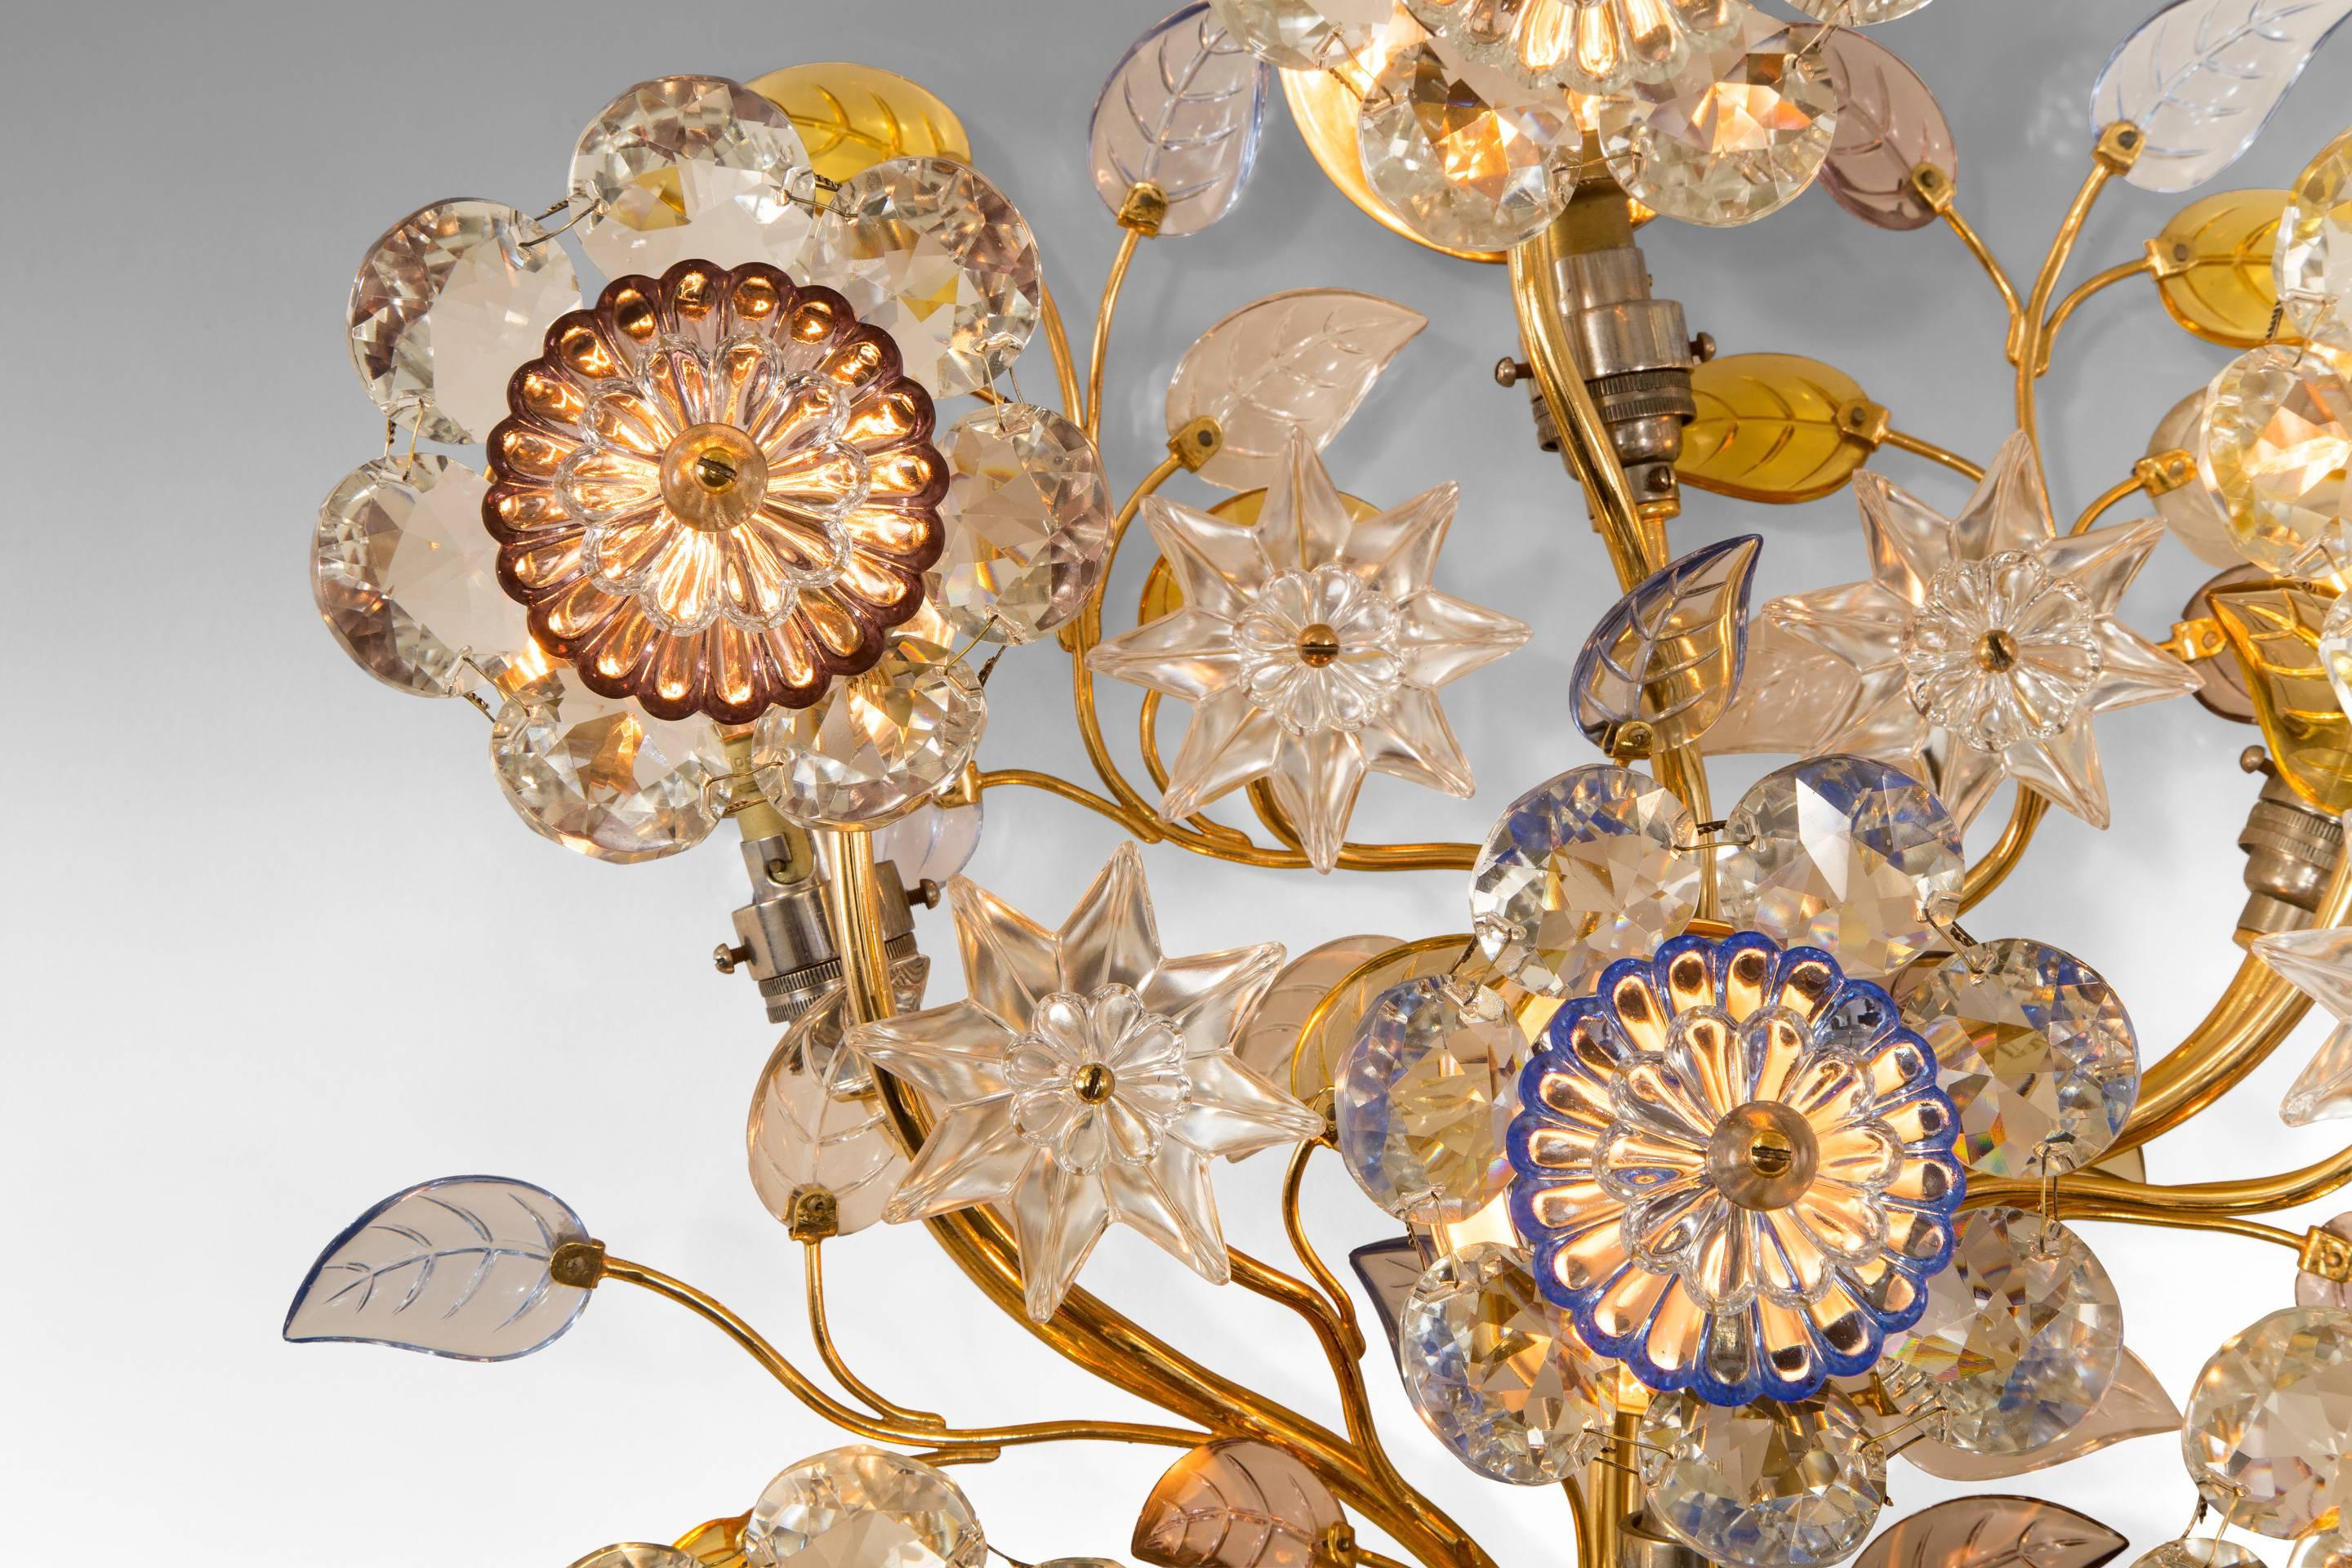 Each bouquet composed of serpentine branches supporting colored and colorless glass stars, leaves and flowers, with nine light holders, the branches bound with a bracelet of colorless beaded glass.

A related model is illustrated by Gerhard Krohn